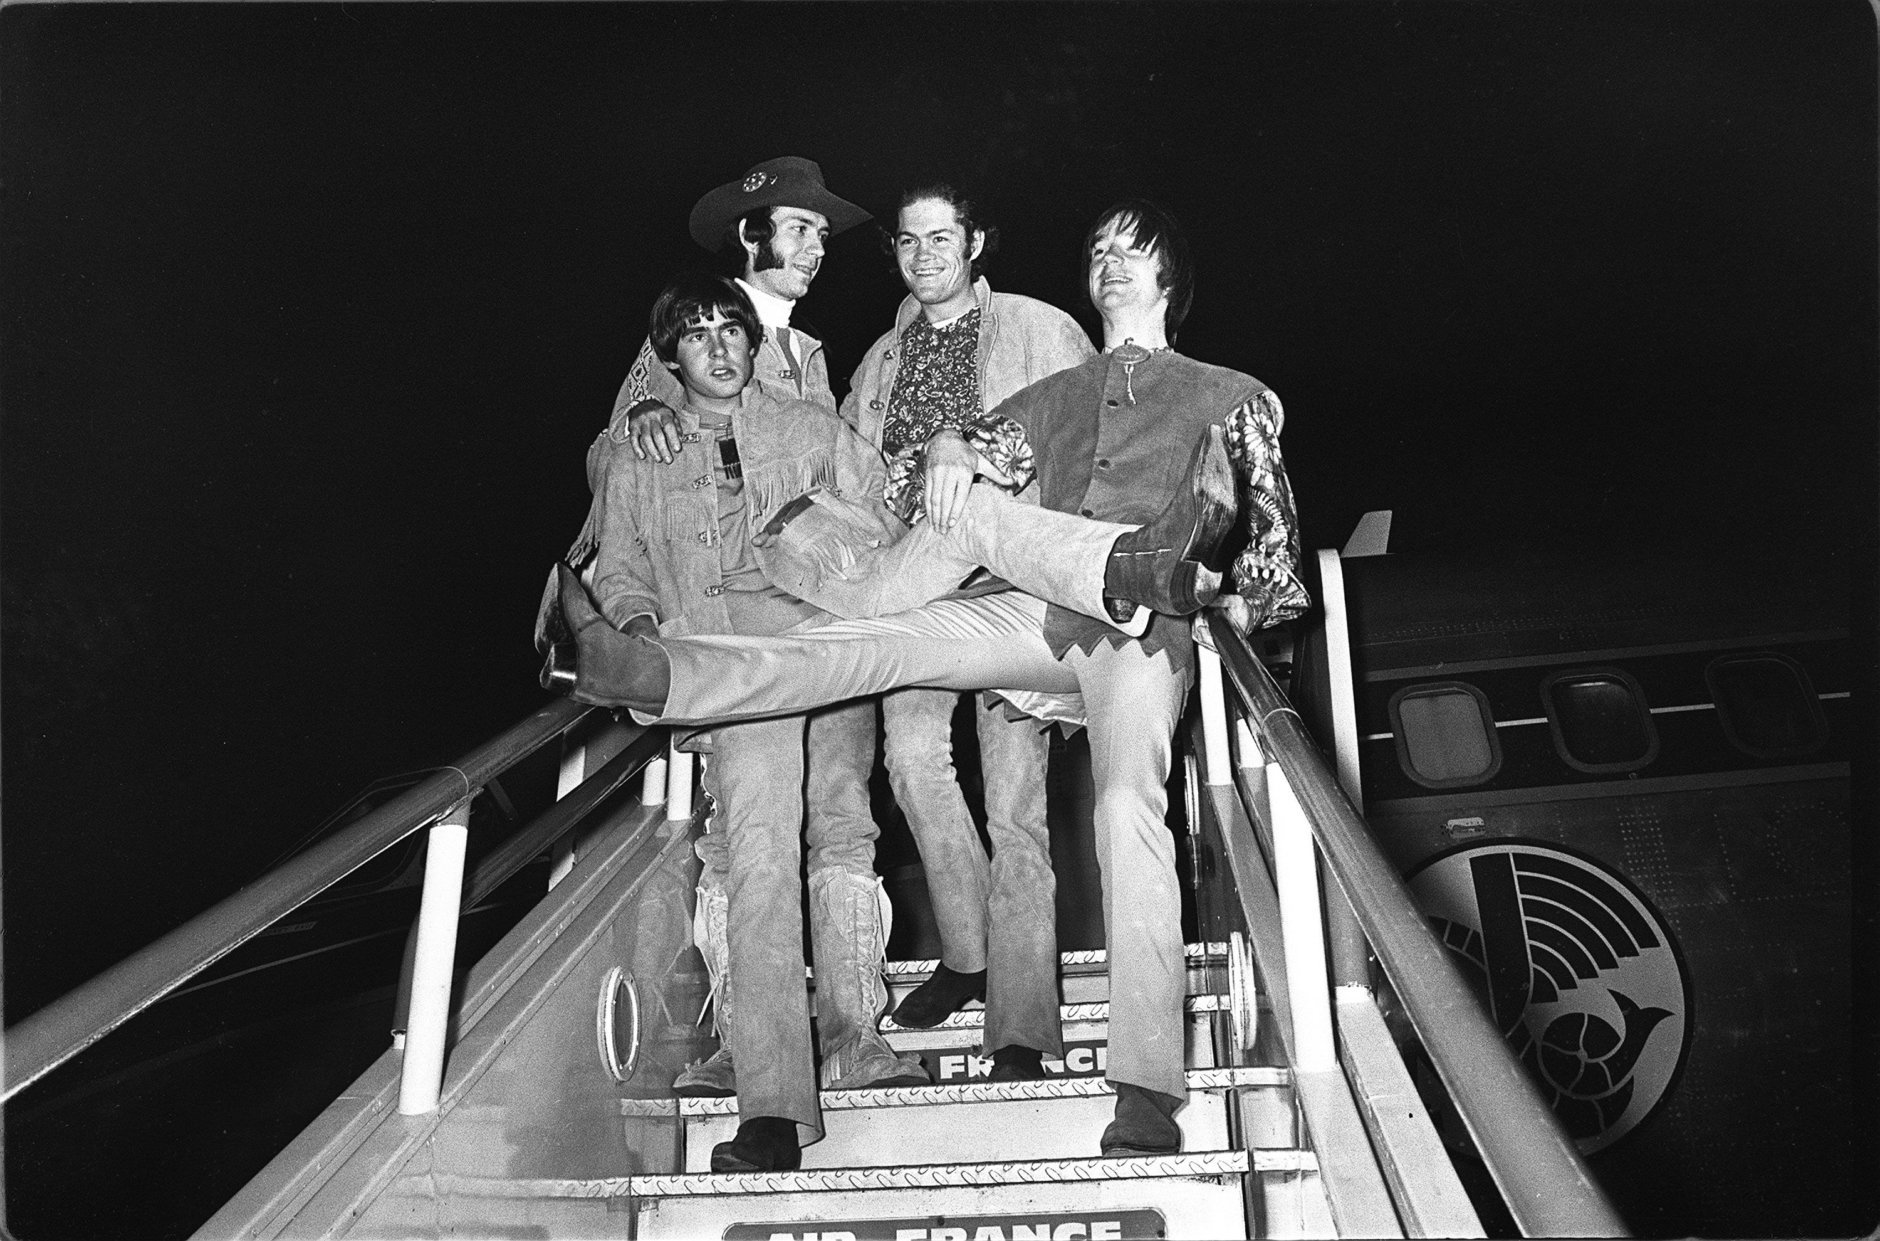 American pop group, the Monkees, pictured on arrival at London Airport, 28th June, 1967. Arriving from Paris, the group will perform a live stage show at the Empire Pool, Wembley, this coming weekend. Left to right are Davy Jones, Peter Tork, Micky Dolenz and Mike Nezsmith. (AP photo).